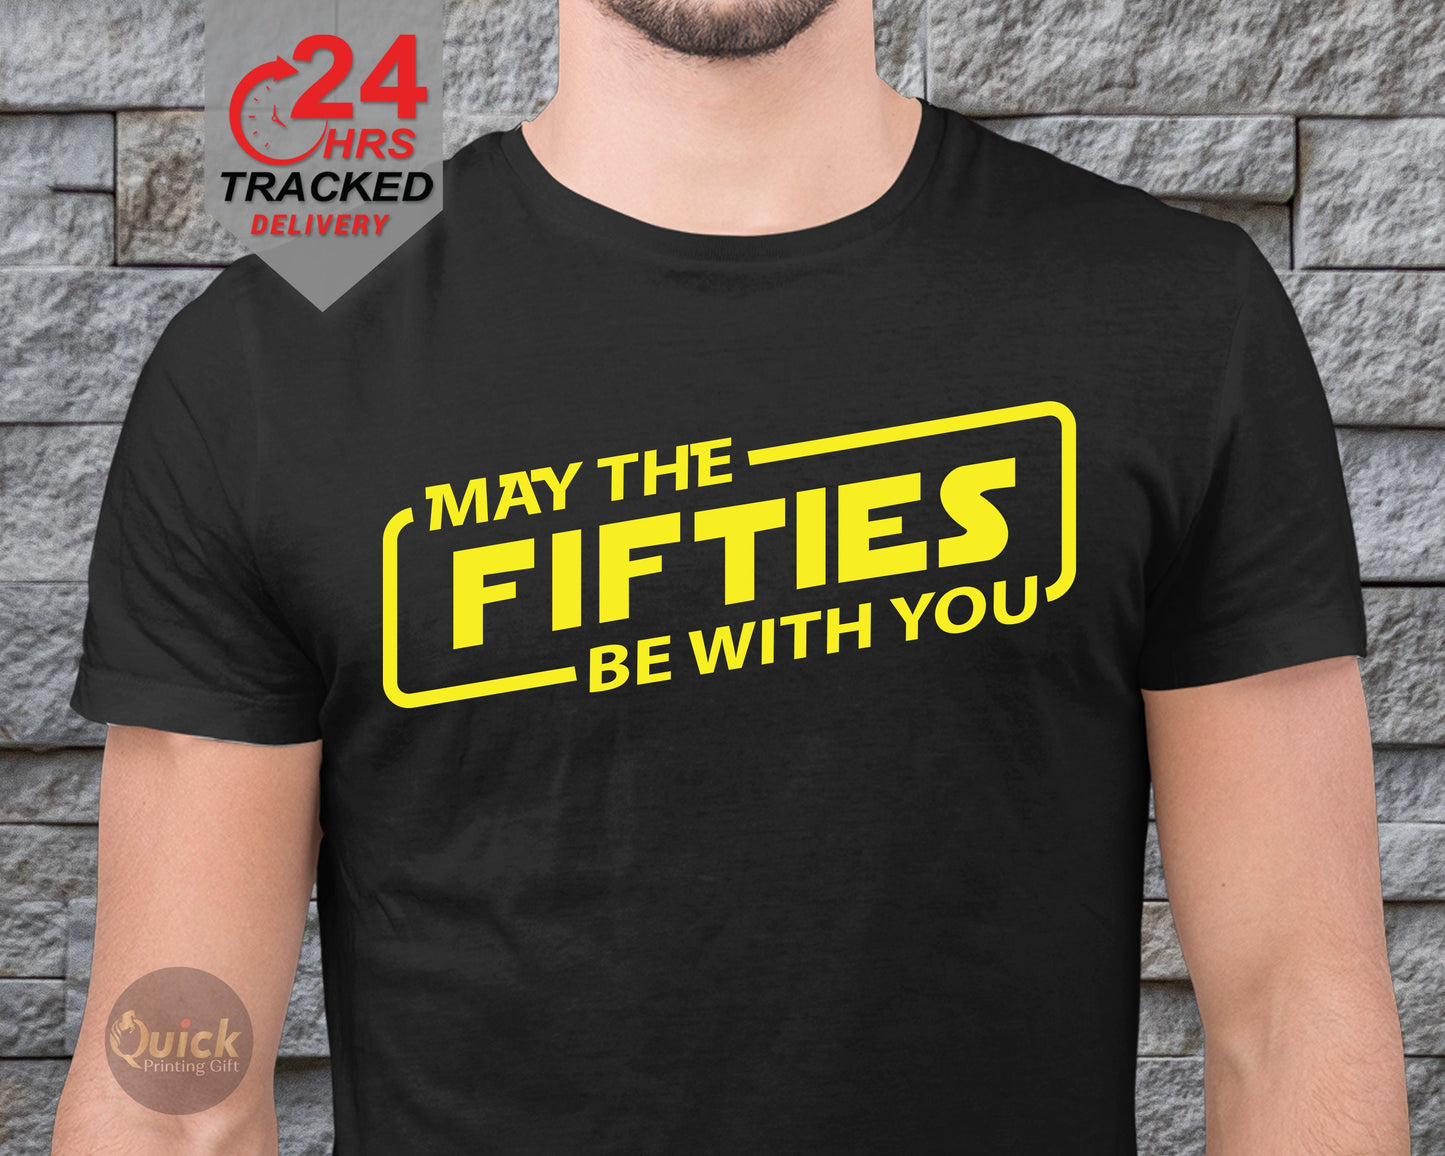 May The Fifties Be With You Tshirt, The Ideal 50th Birthday Gift for Men, Fathers Day Shirt for Dad, 50 Year Old Man shirt.